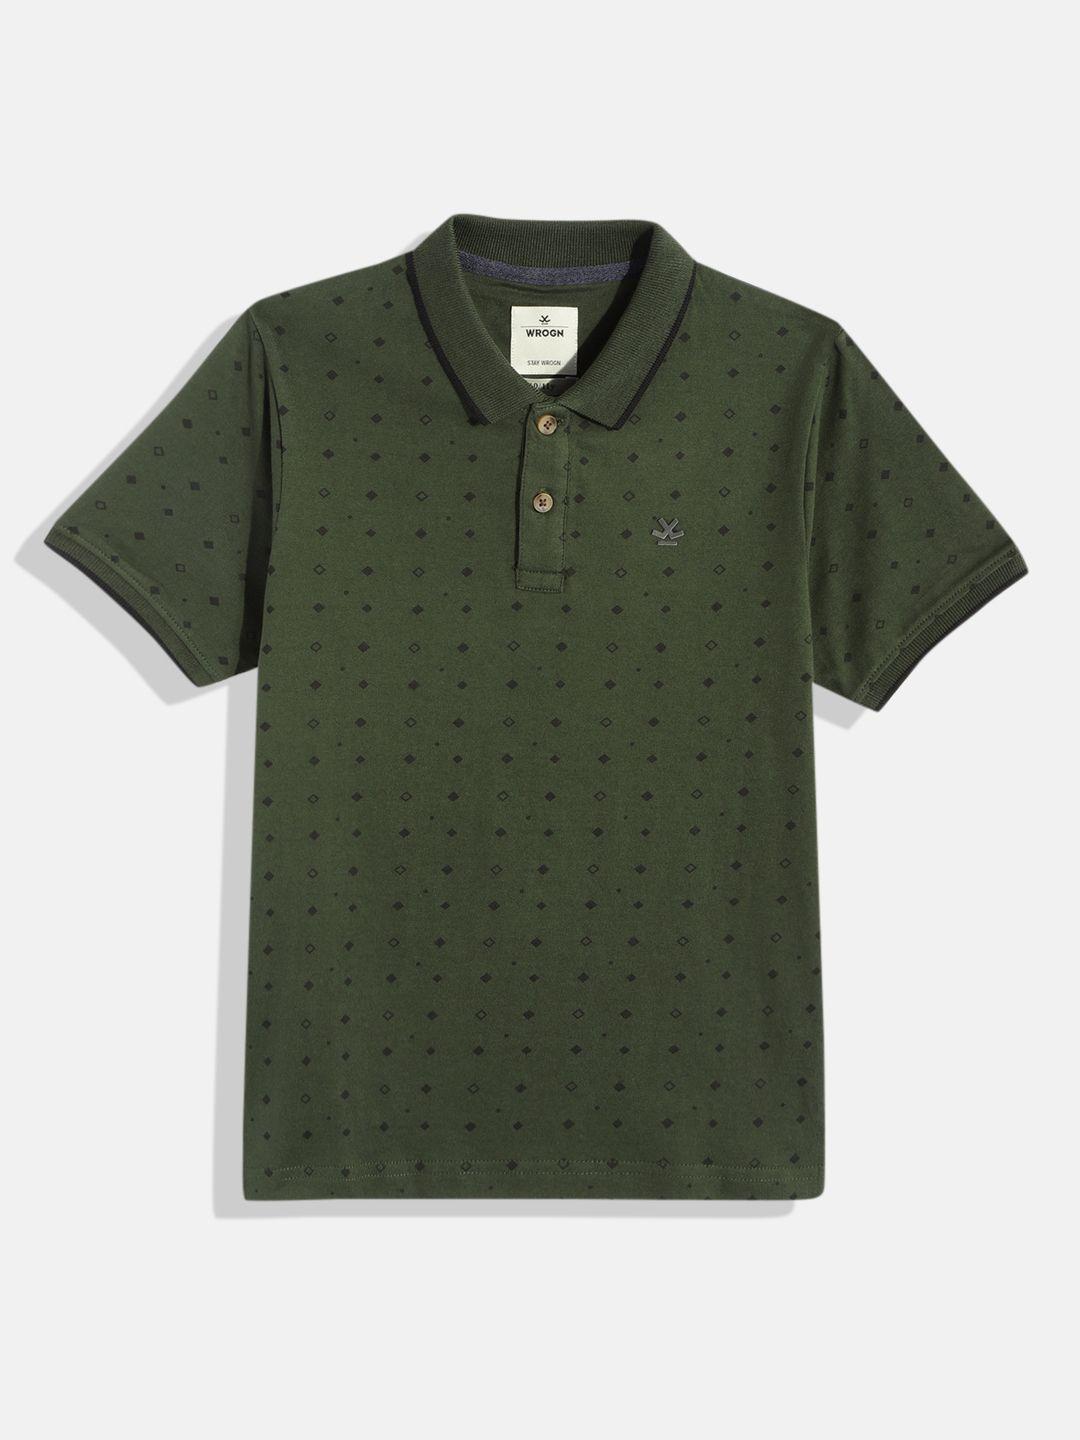 wrogn youth boys green printed pure cotton polo collar t-shirt